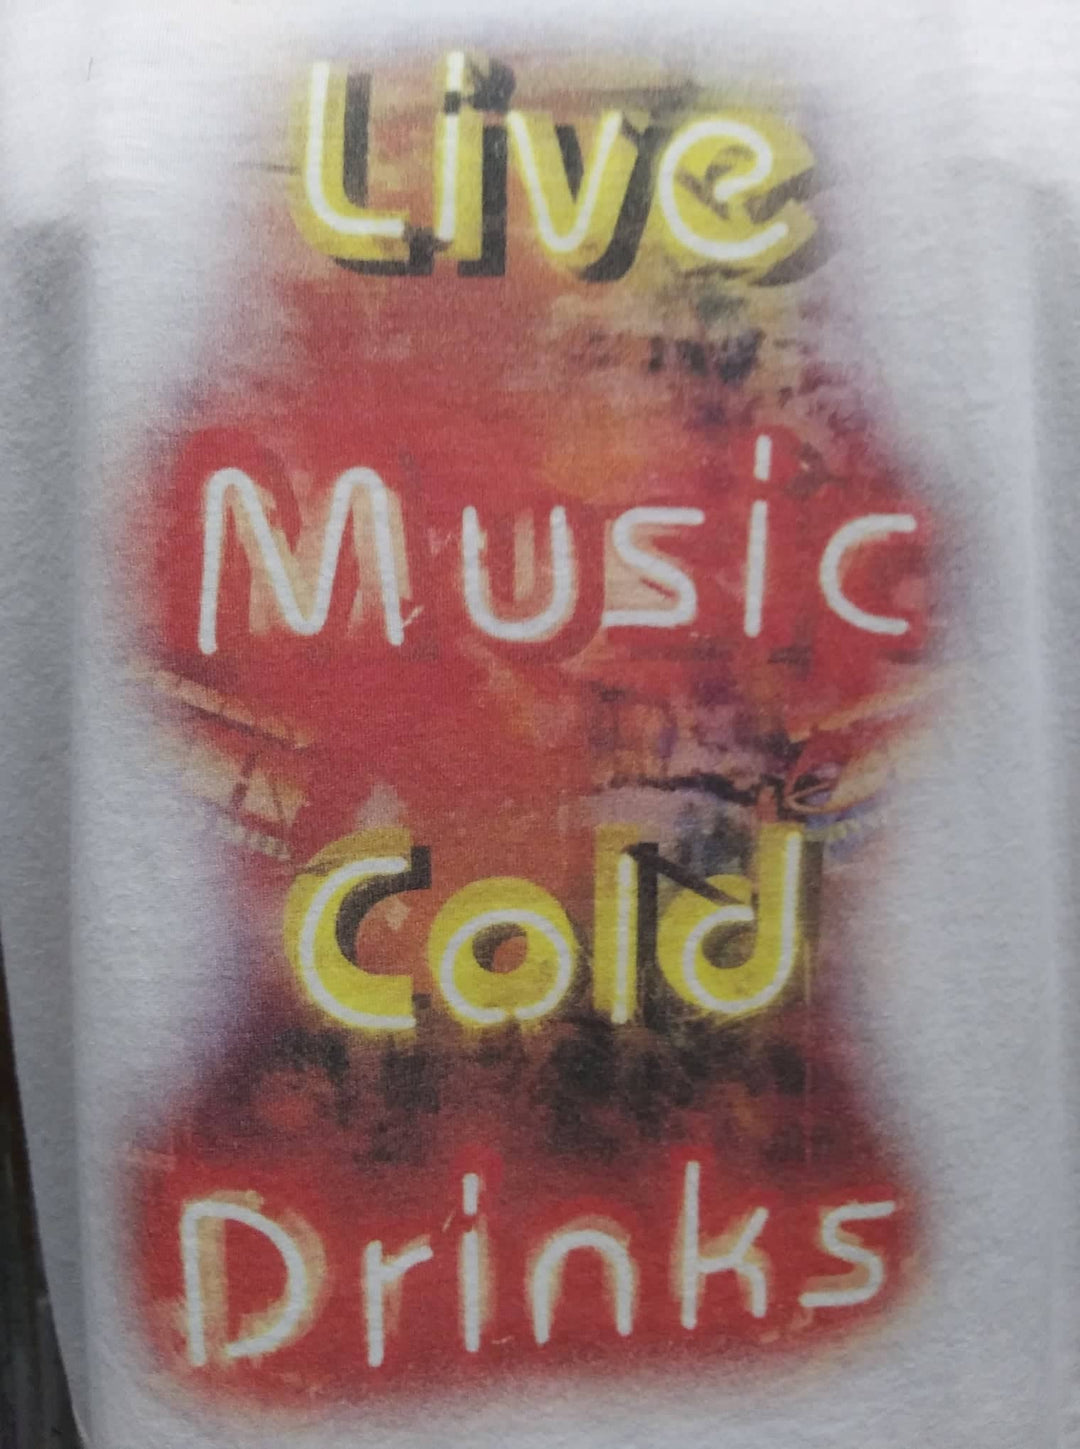 West 20 Live Music, Cold Drinks Tee